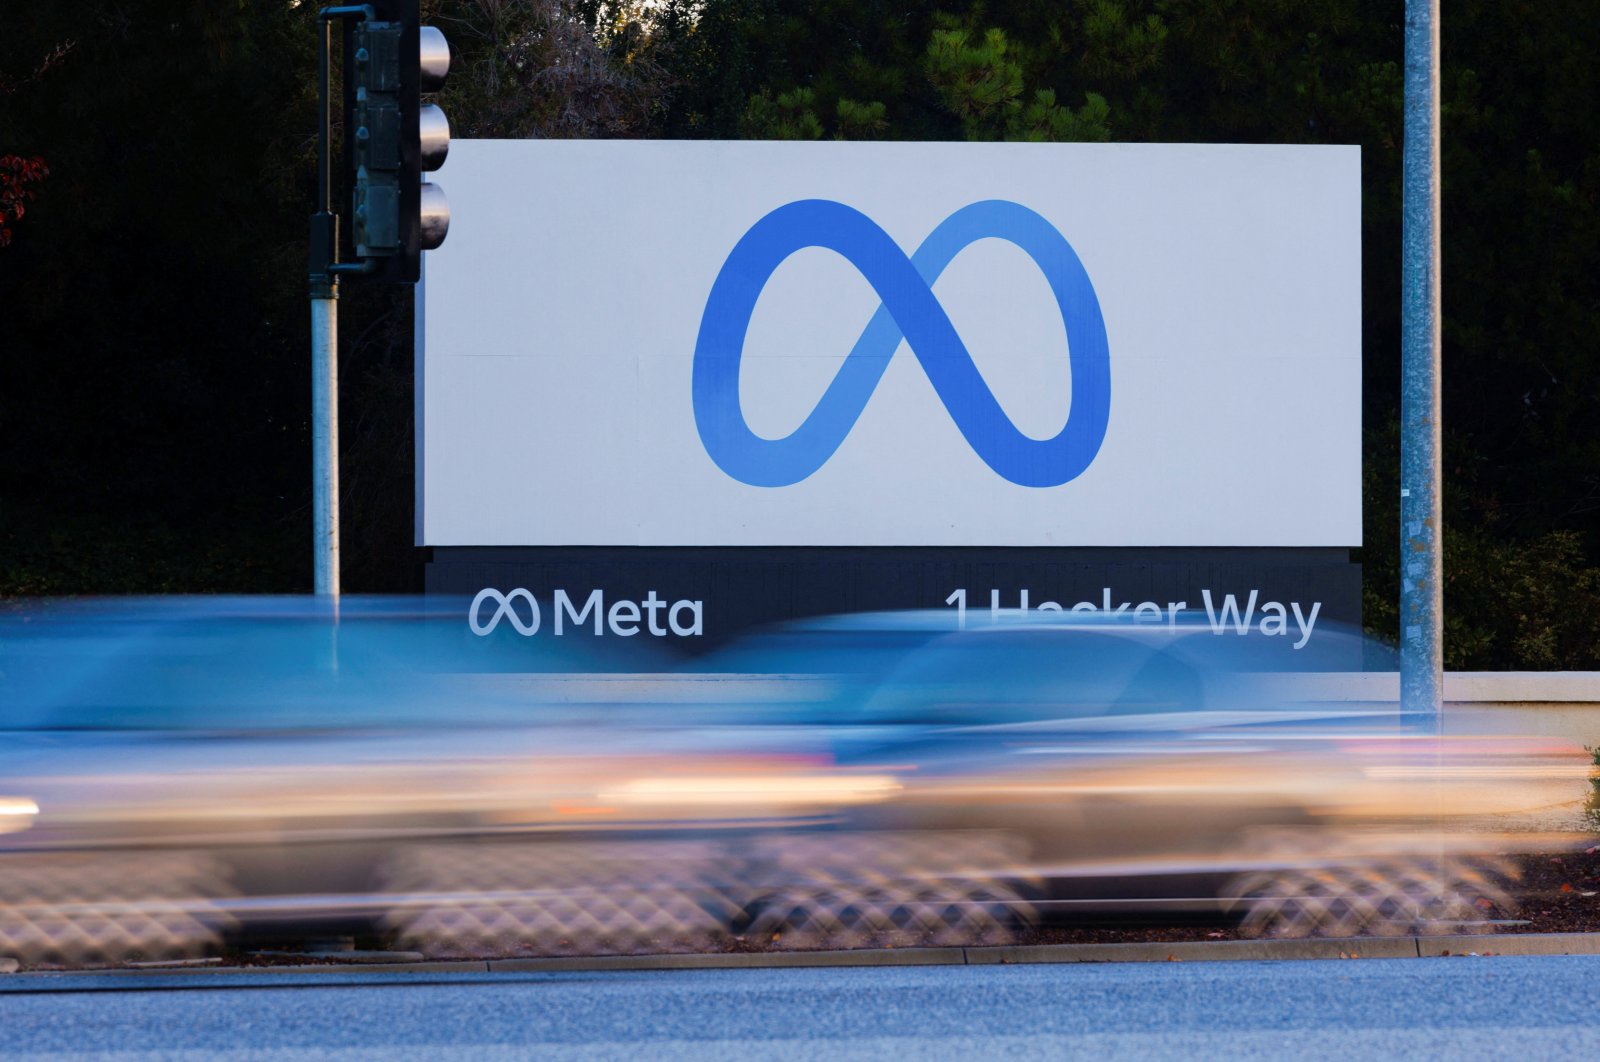 Morning commute traffic streams past the Meta sign outside the headquarters of Facebook parent company Meta Platforms Inc in Mountain View, California, U.S., Nov. 9, 2022. (Reuters Photo)